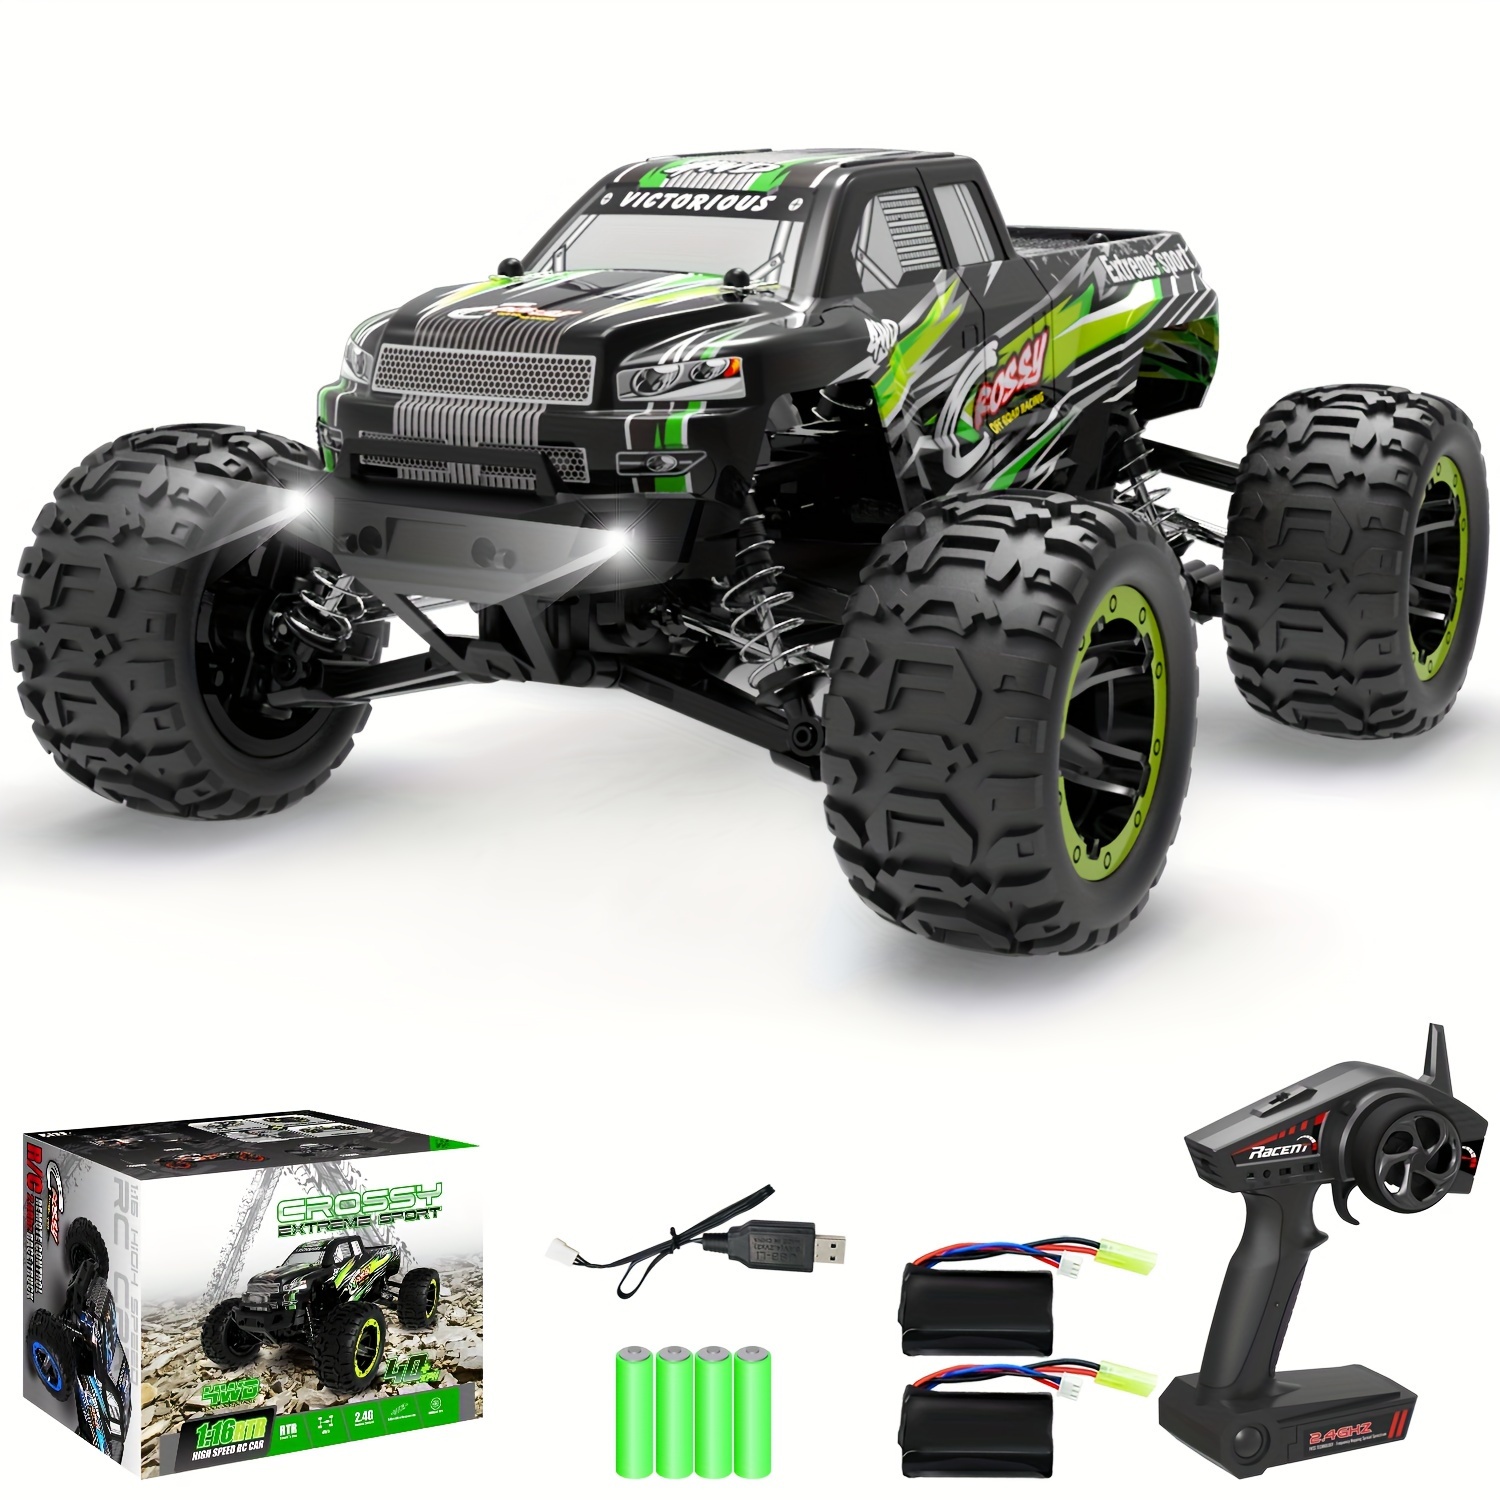 

Rc Car, 1:16 Scale All Terrain Monster Truck, 30mph 4wd Off Road Fast Remote Control Toy 2.4ghz High Speed Electric Vehicle With 2 Rechargeable Batteries, 40+ Min Play, Gift For Boys Adults